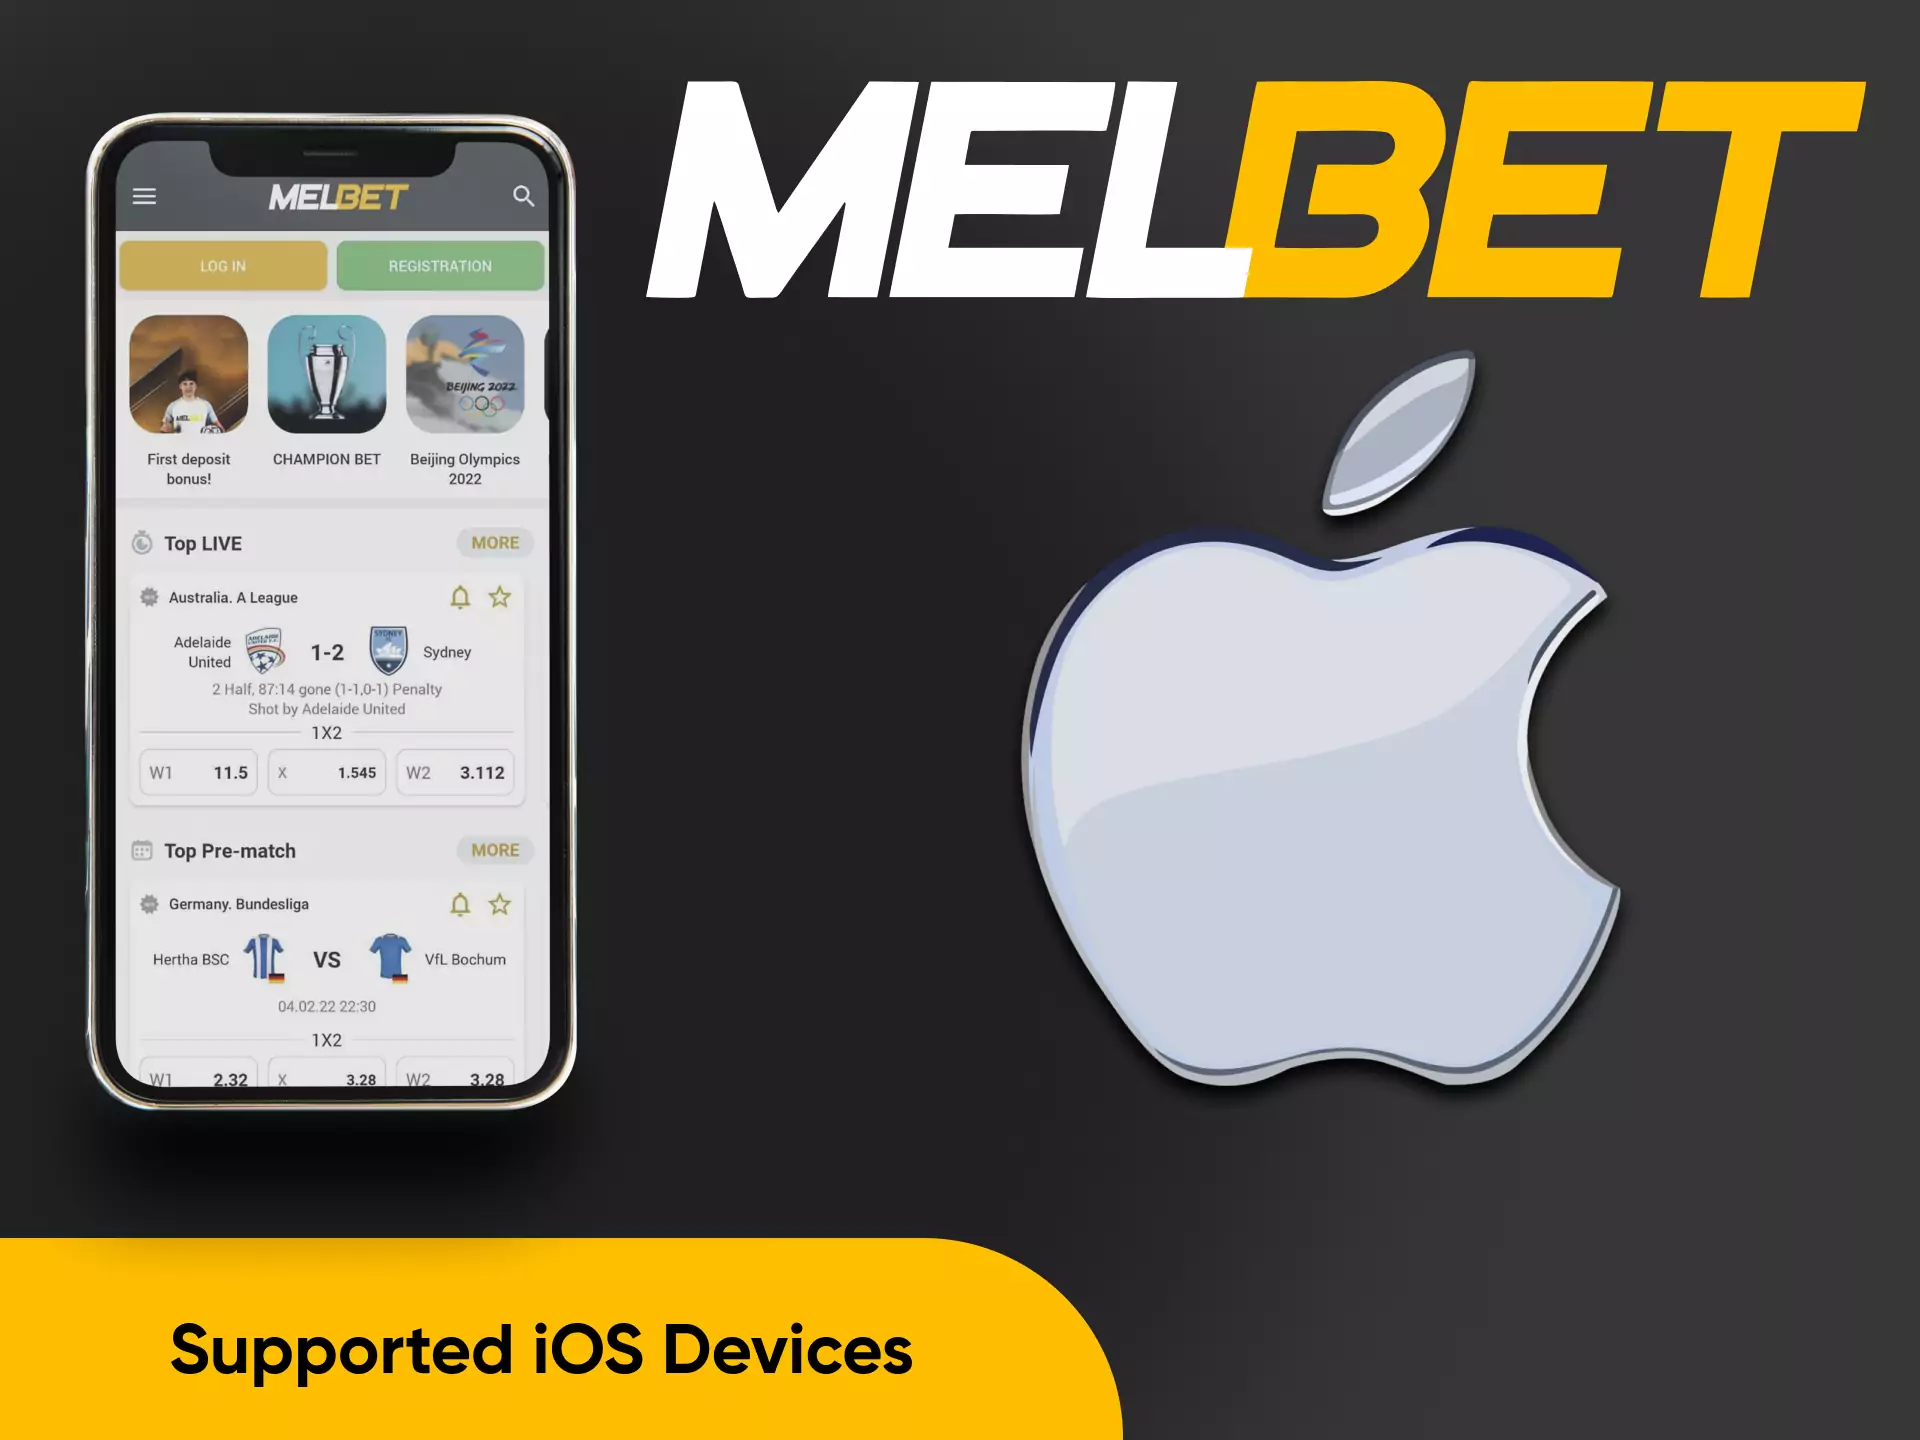 The Melbet app can be installed on any iOS device.